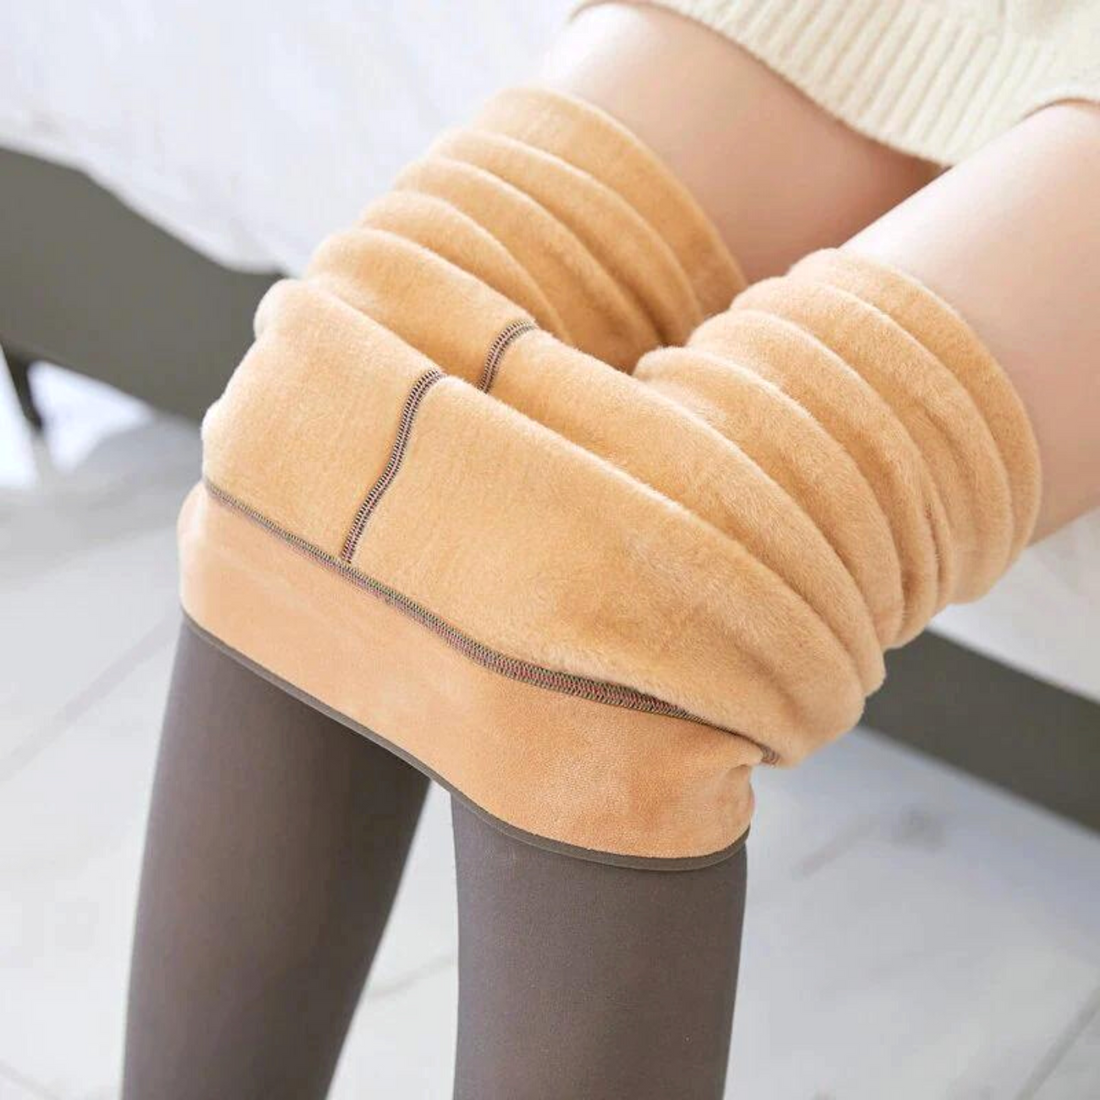 Warm and durable winter tights